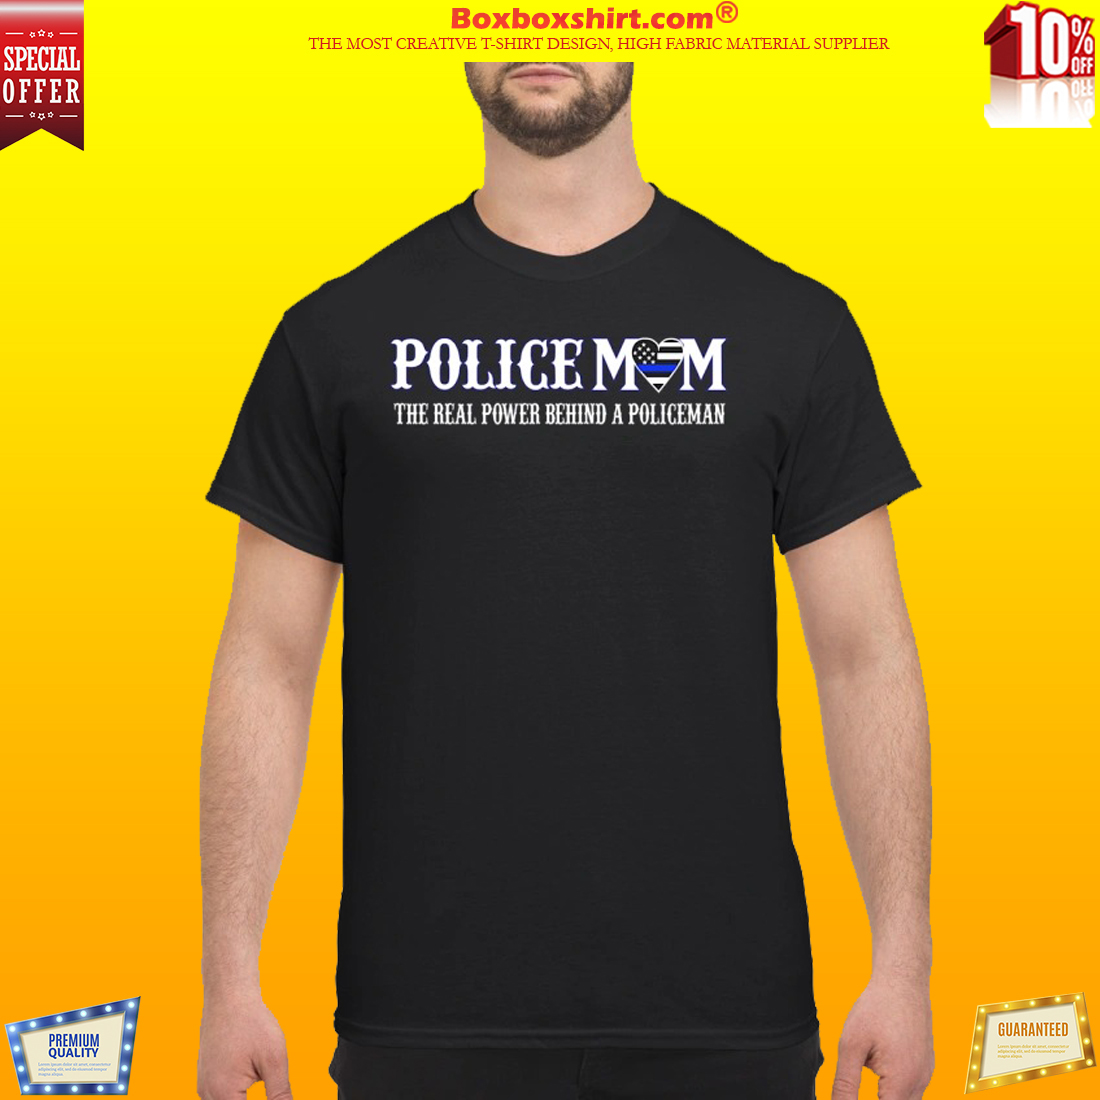 Policemom the real power behind a policeman classic shirt